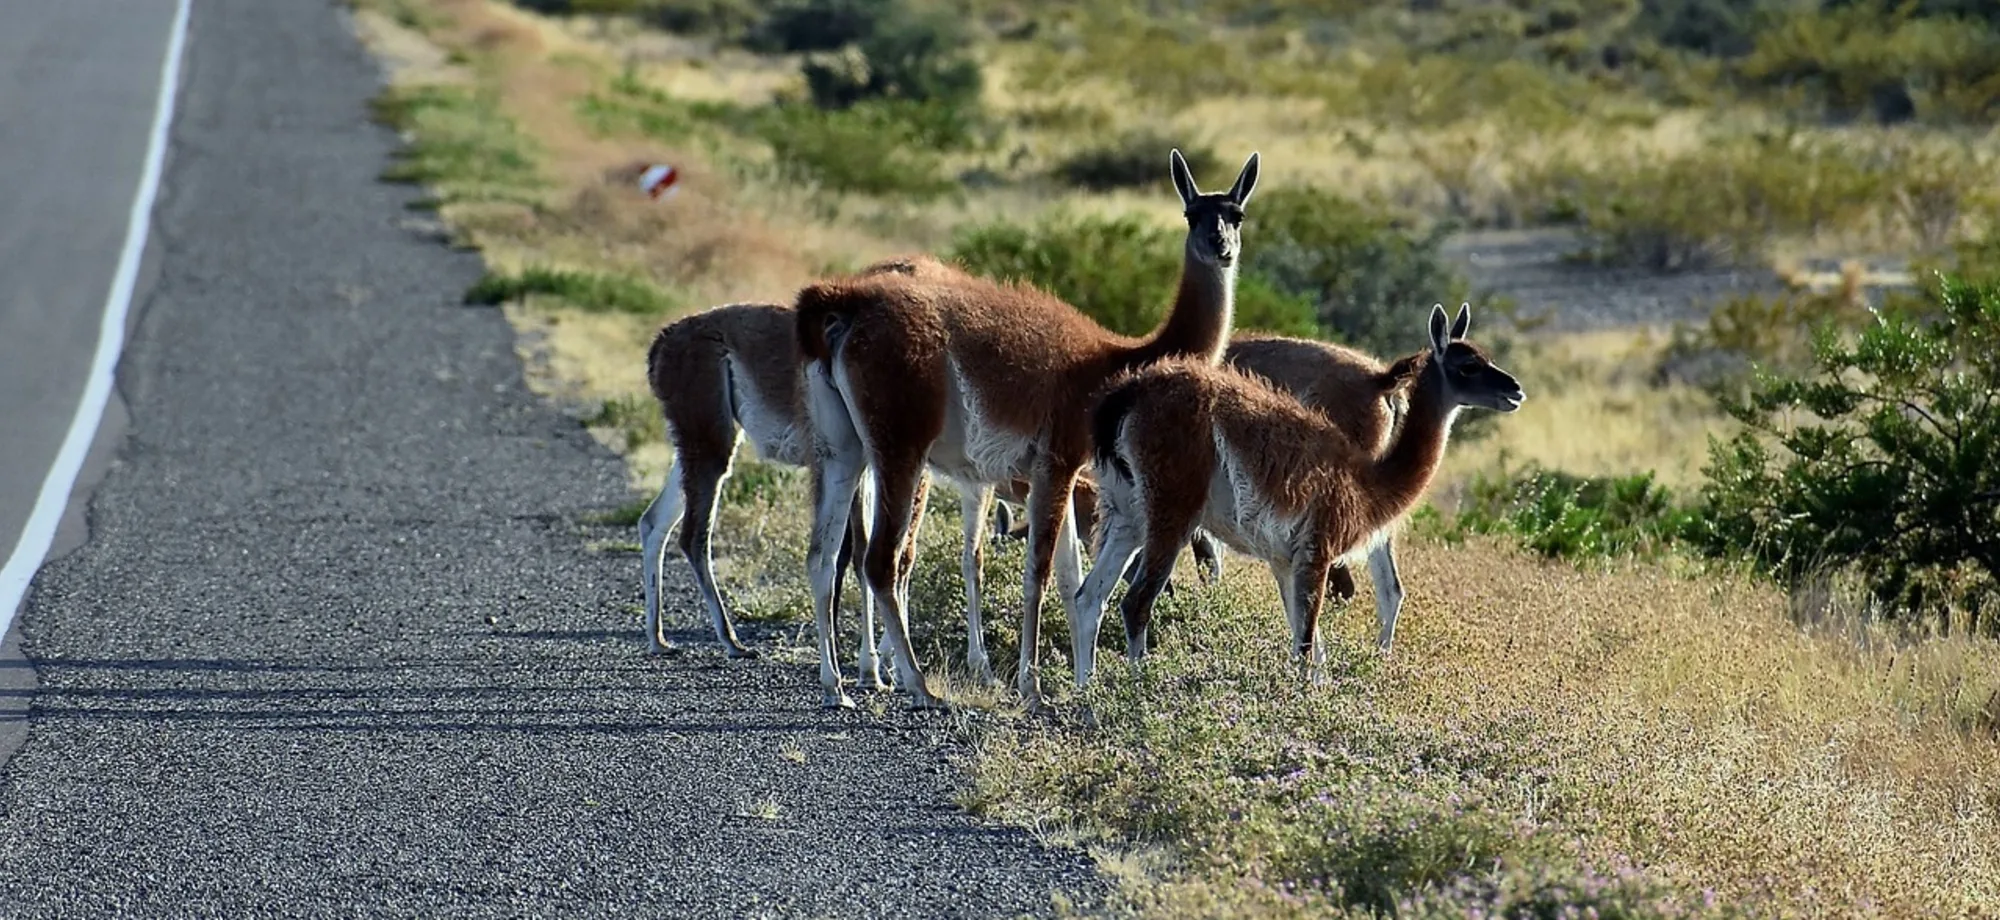 Guanacos is standing in the middle of the road.